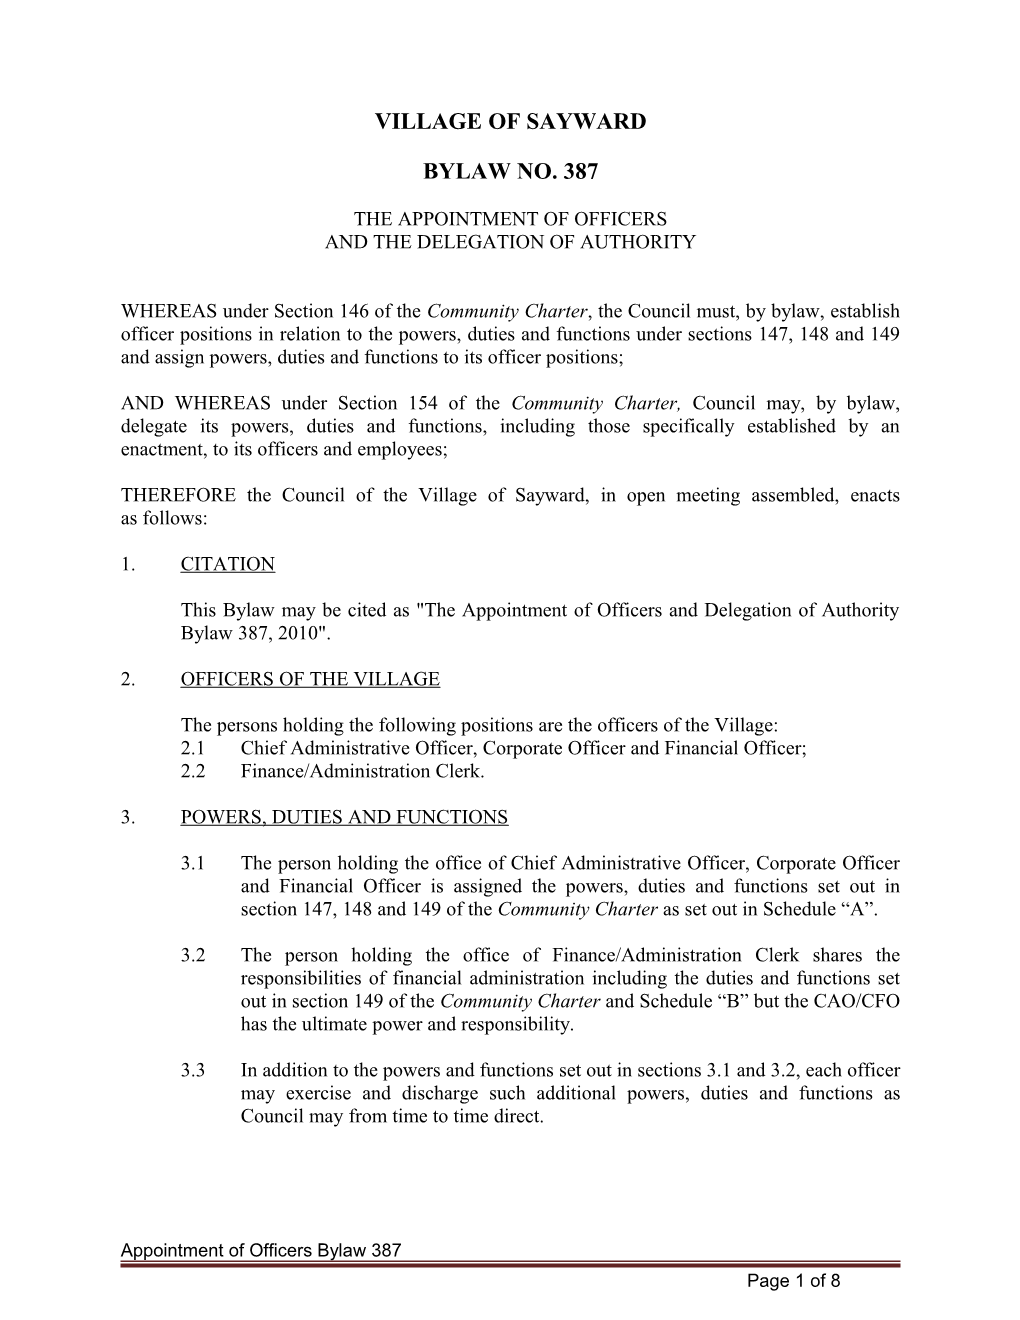 Officers Appointment and Delegation Bylaw 2006 No. 7031